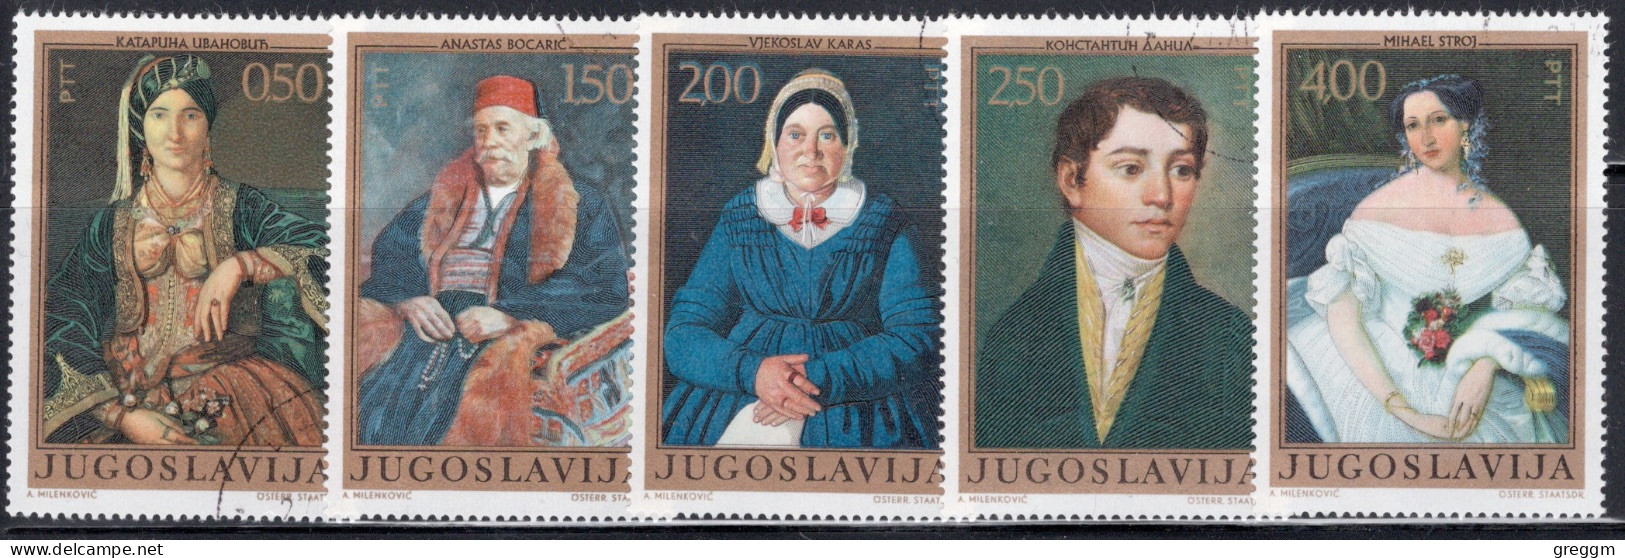 Yugoslavia 1971 Short Set Of Stamps For Portraits From The 19th Century  In Fine Used - Usati